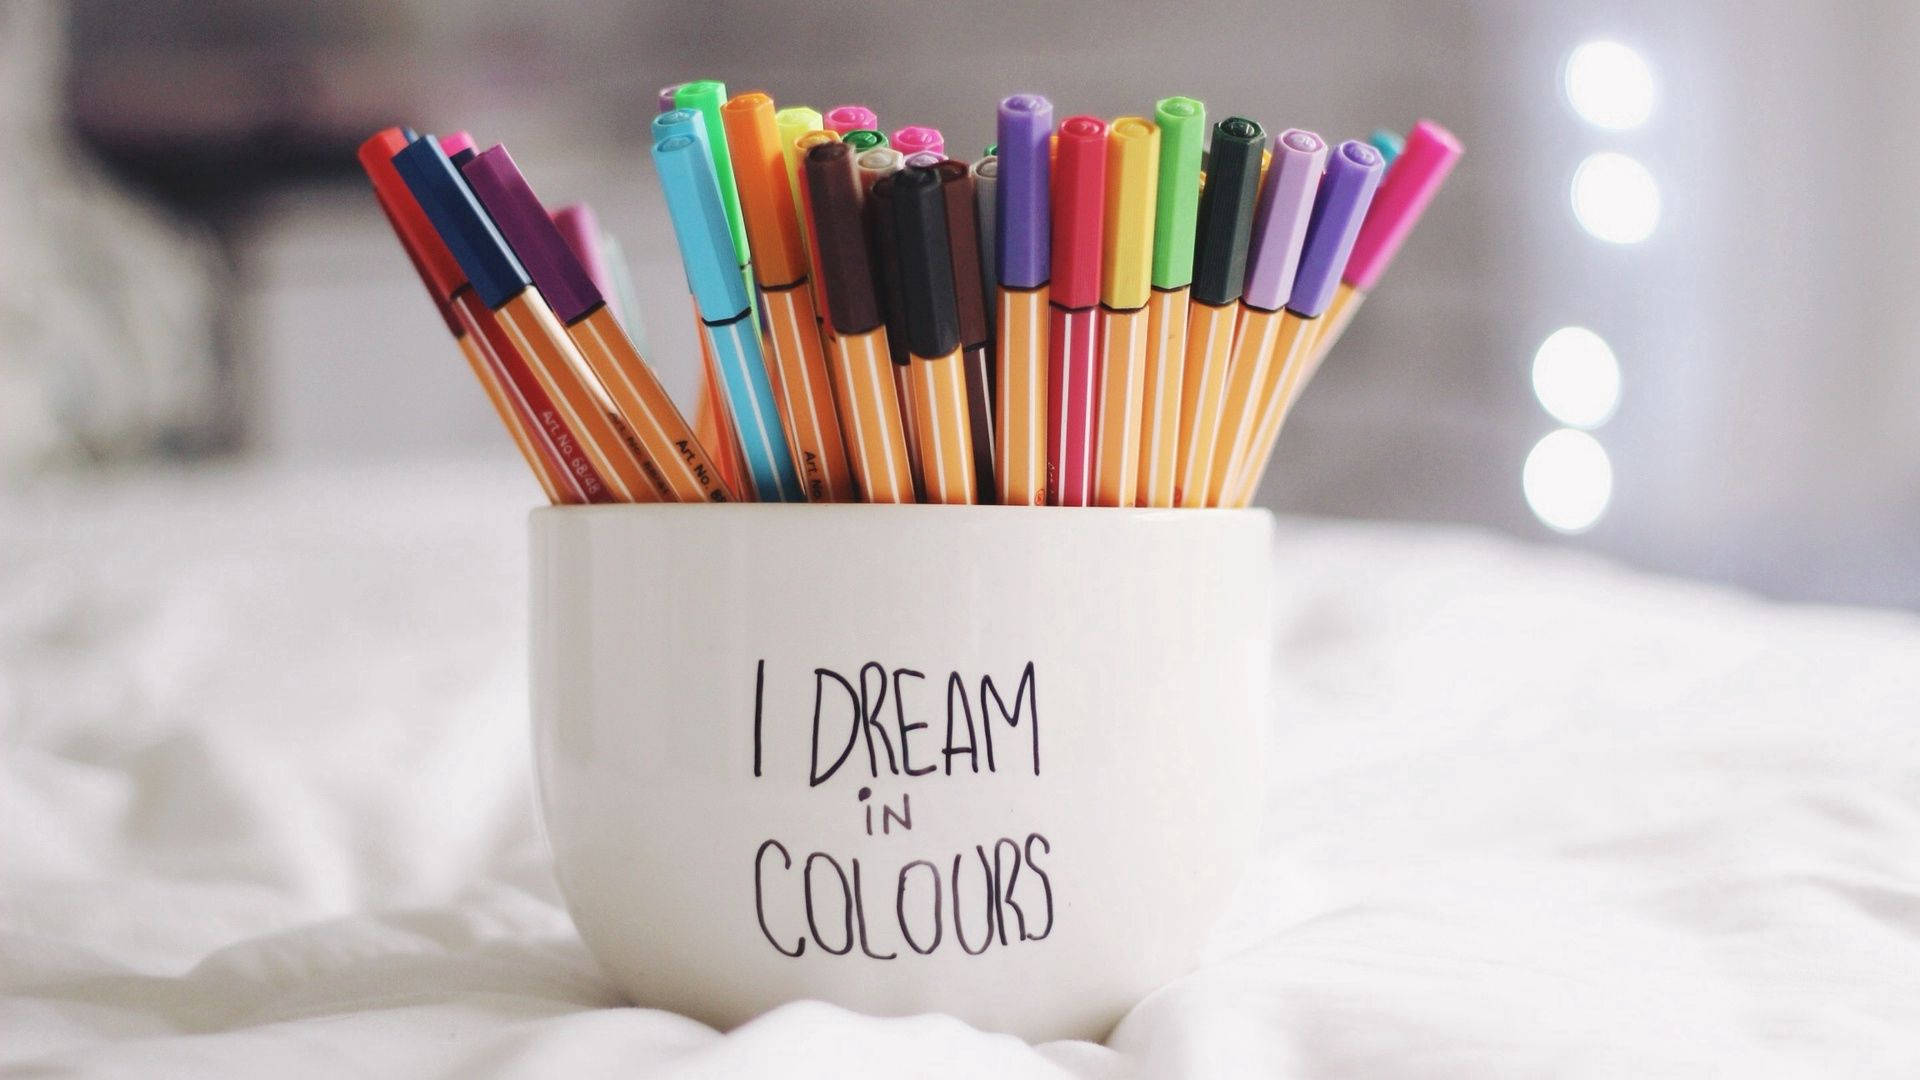 Dream In Colours Mug And Pens Background